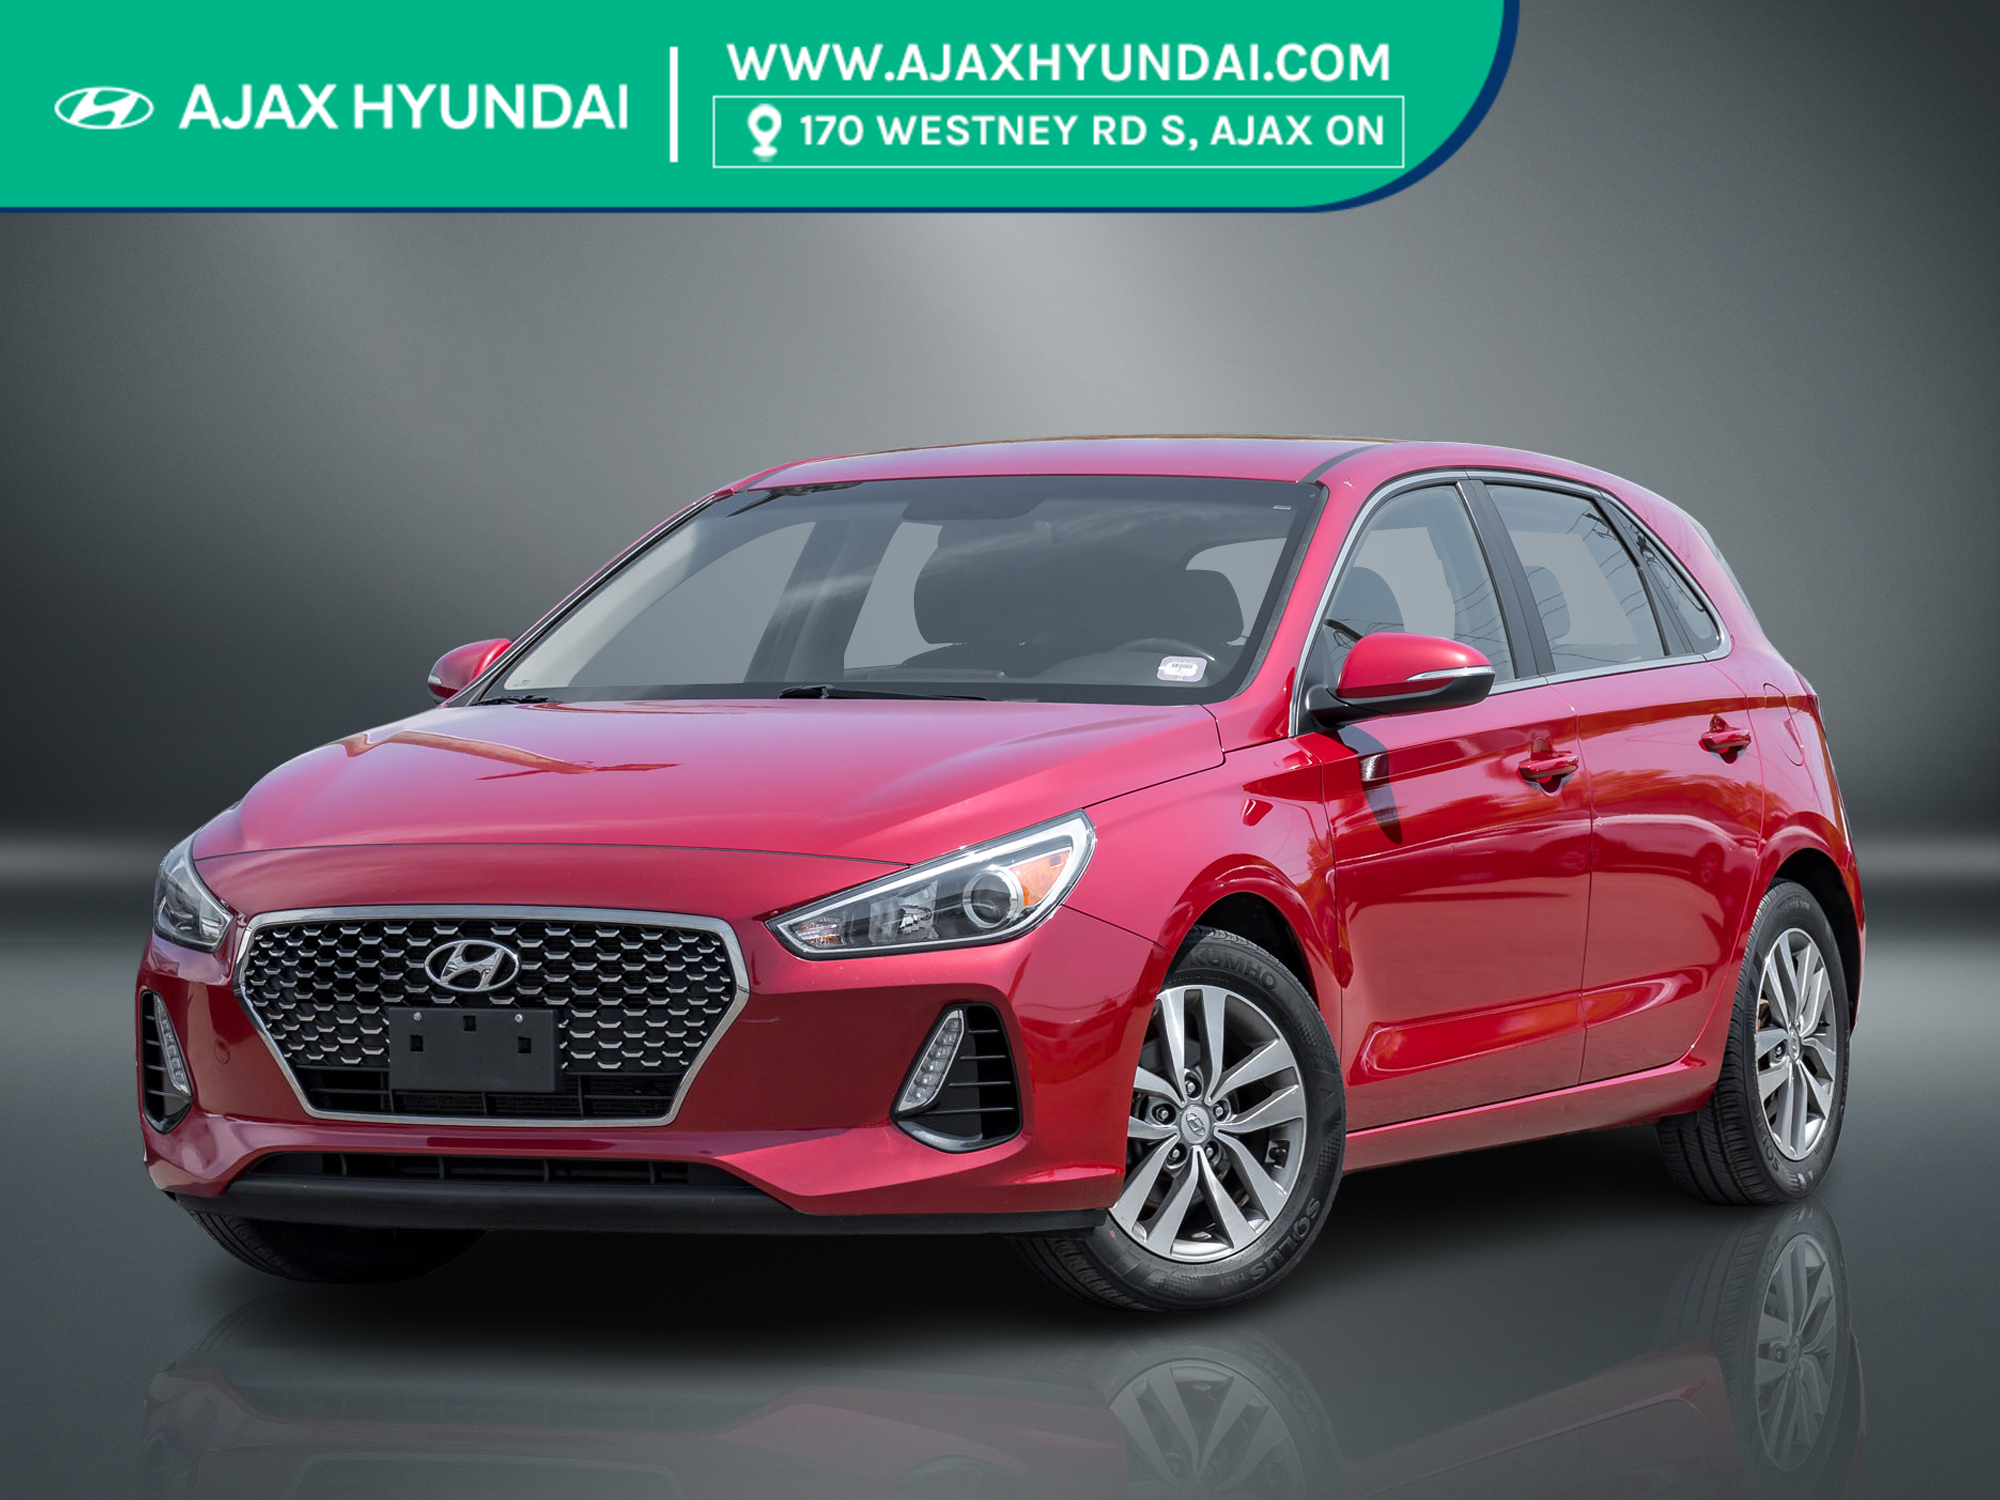 2019 Hyundai Elantra GT Base NO ACCIDENT | LOW KM | RATES FROM 4.99% NO AC